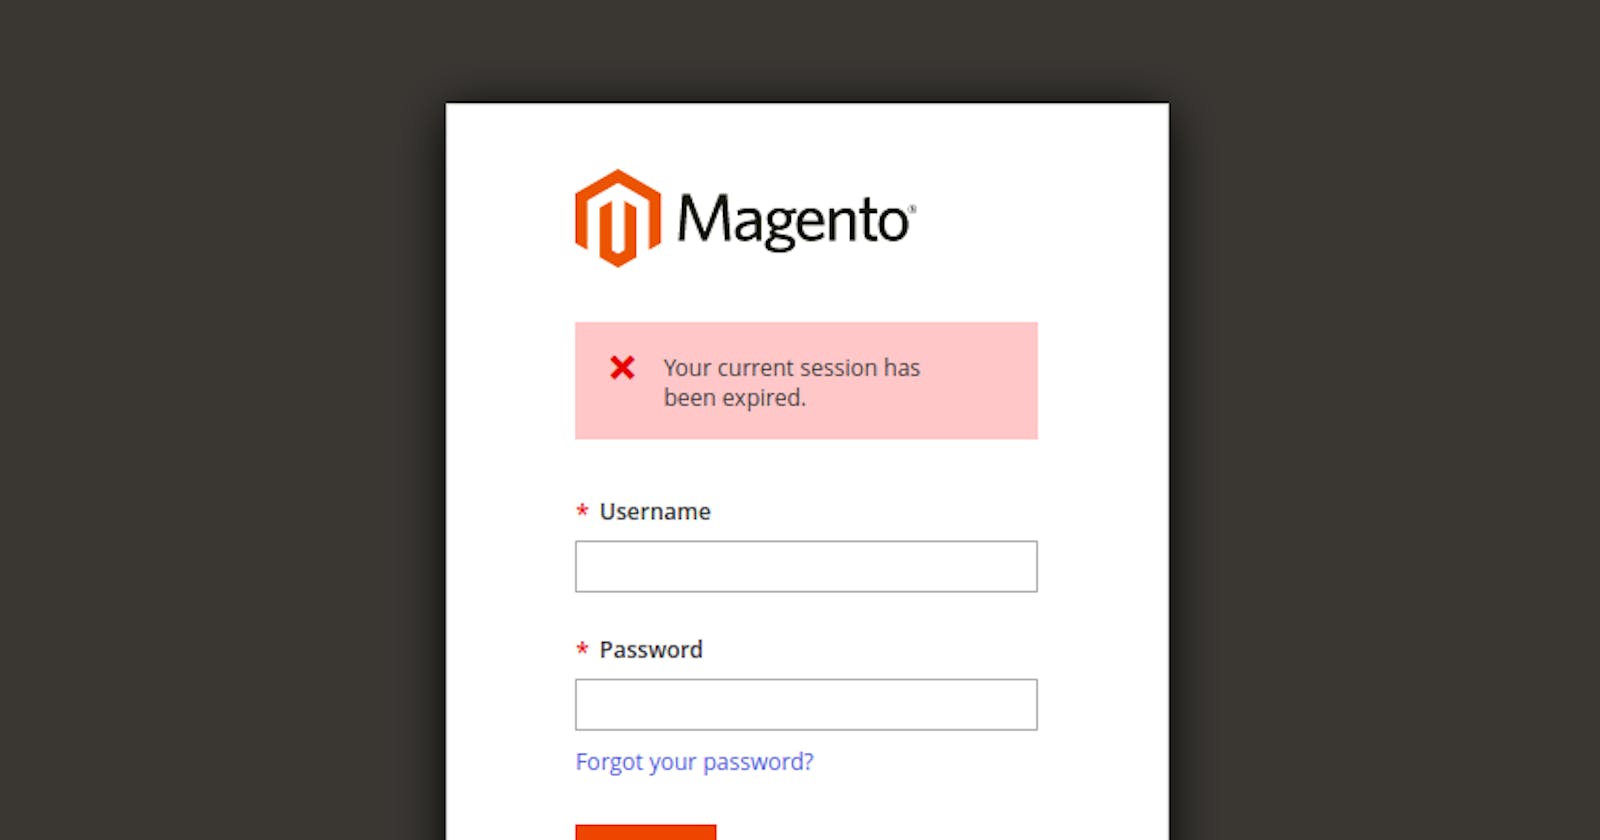 Magento 2: Your Current Session Has Been Expired on Sign in.